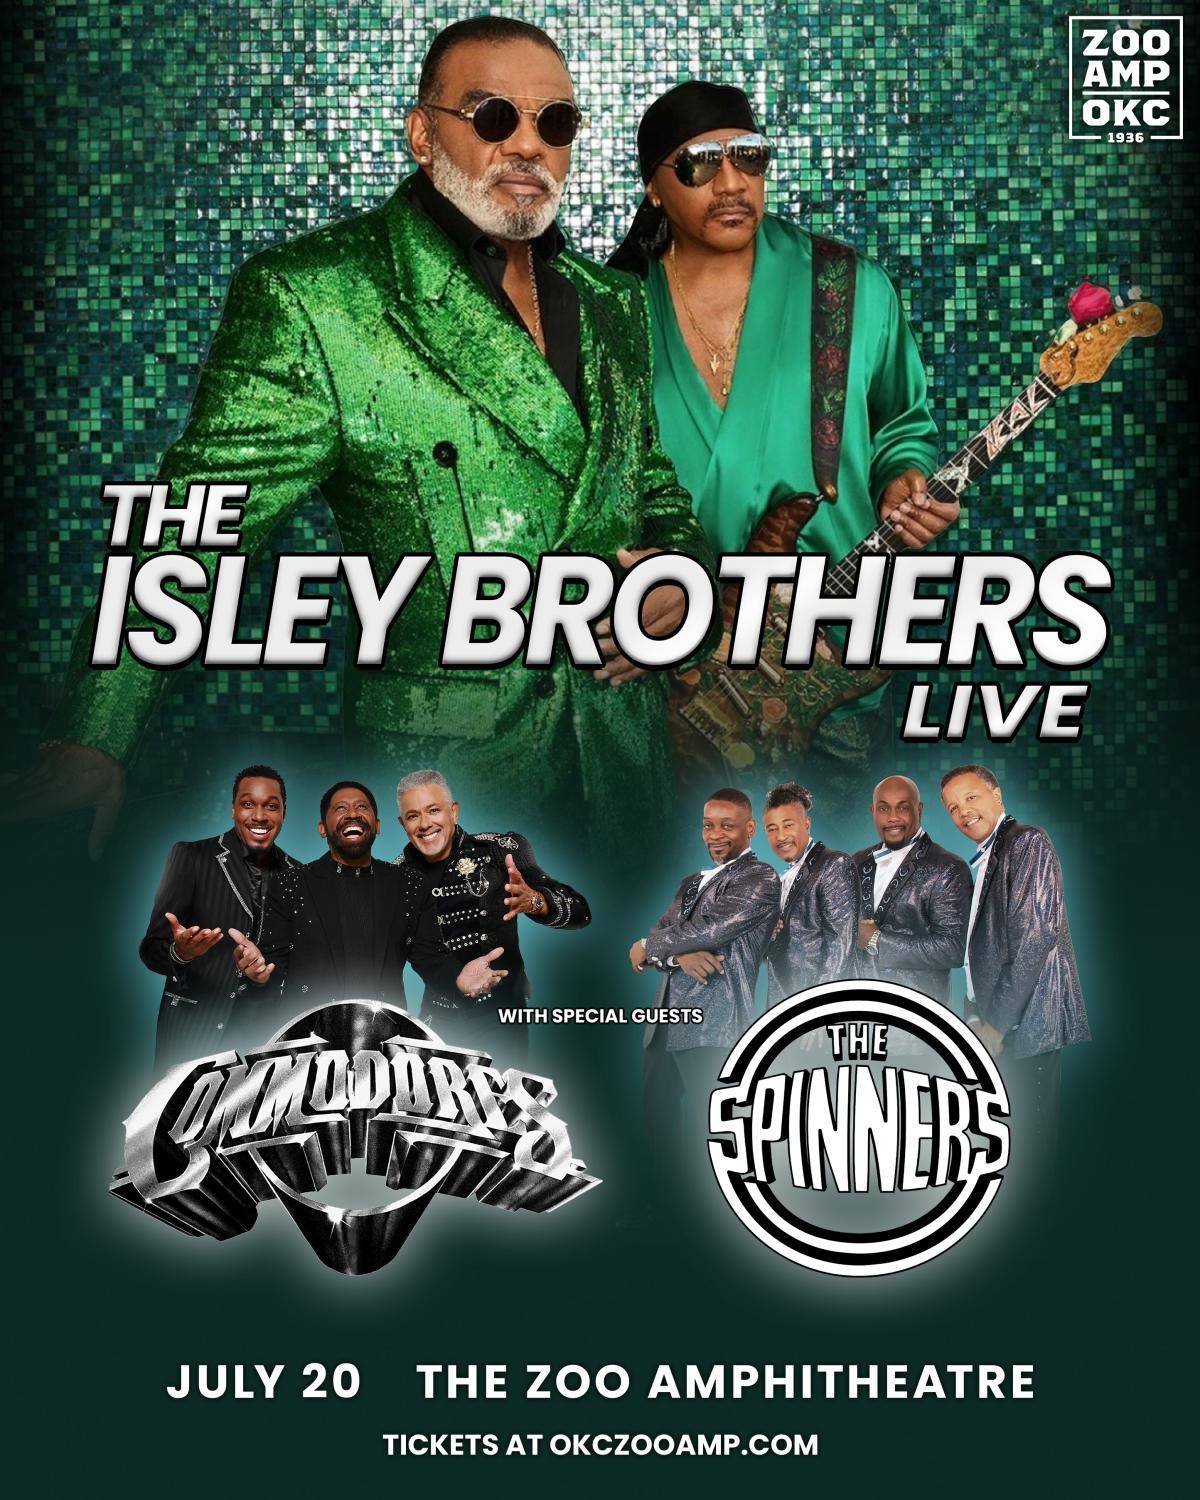 The Isley Brothers, Commodores, and The Spinners